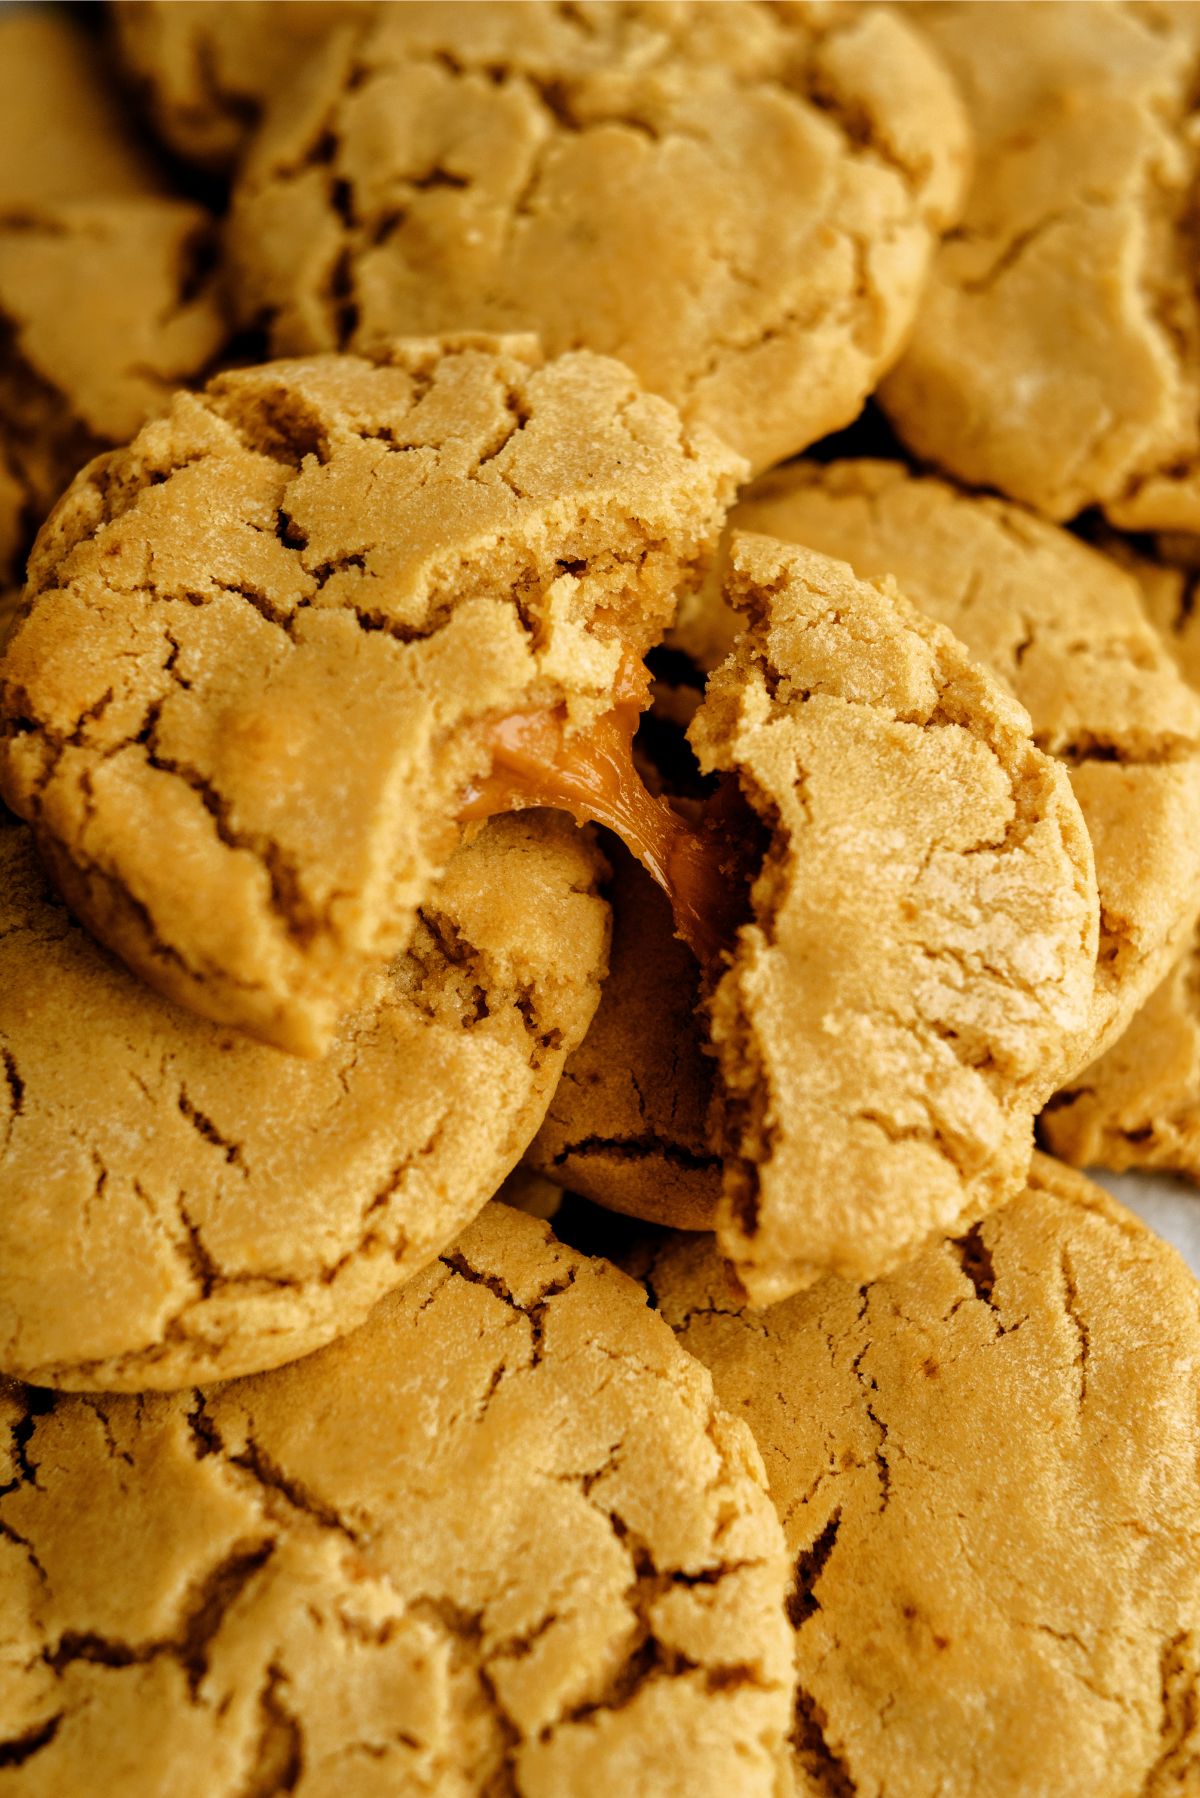 Apple Cider Caramel Cookies with one broken in half to see the caramel